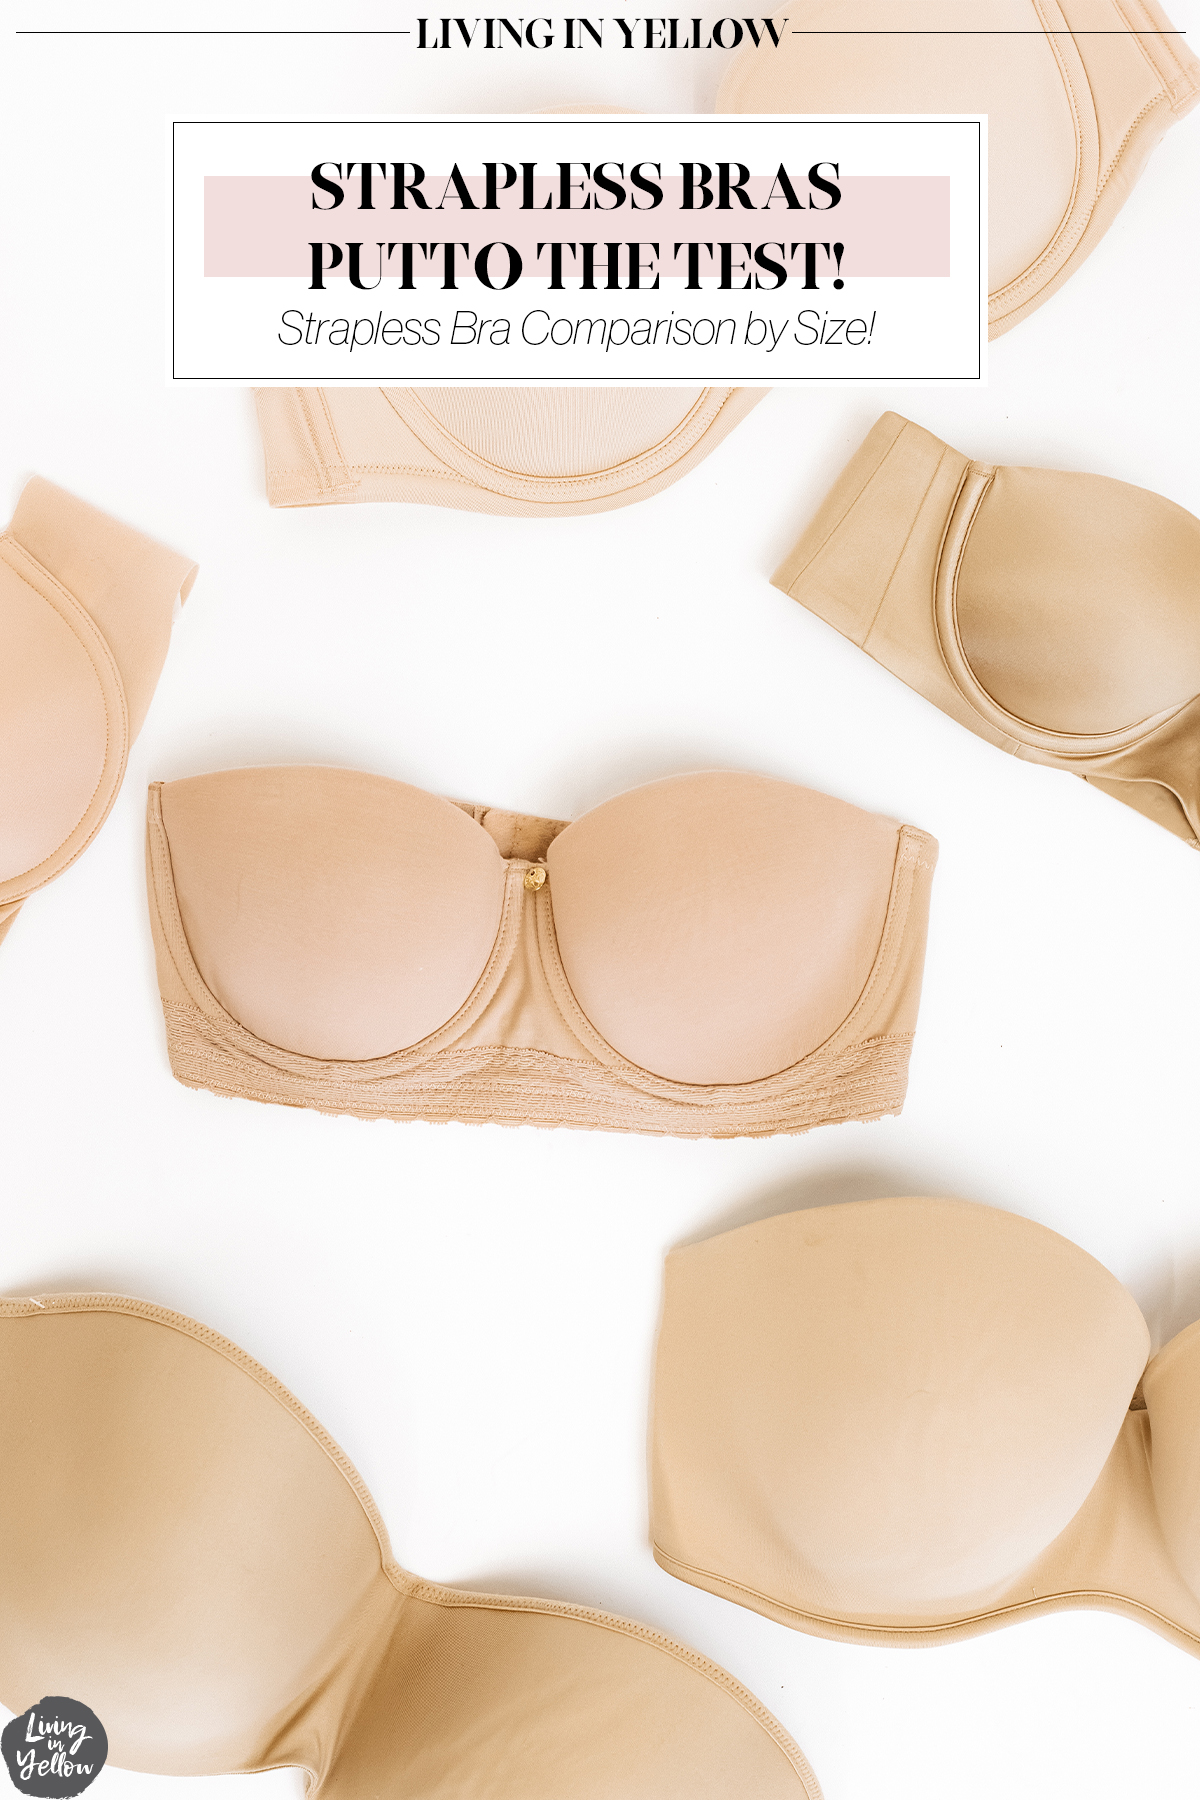 FOUND: The Best Strapless Bra for Your Cup Size // Cup Sizes A-G Tested &  Reviewed - Living in Yellow